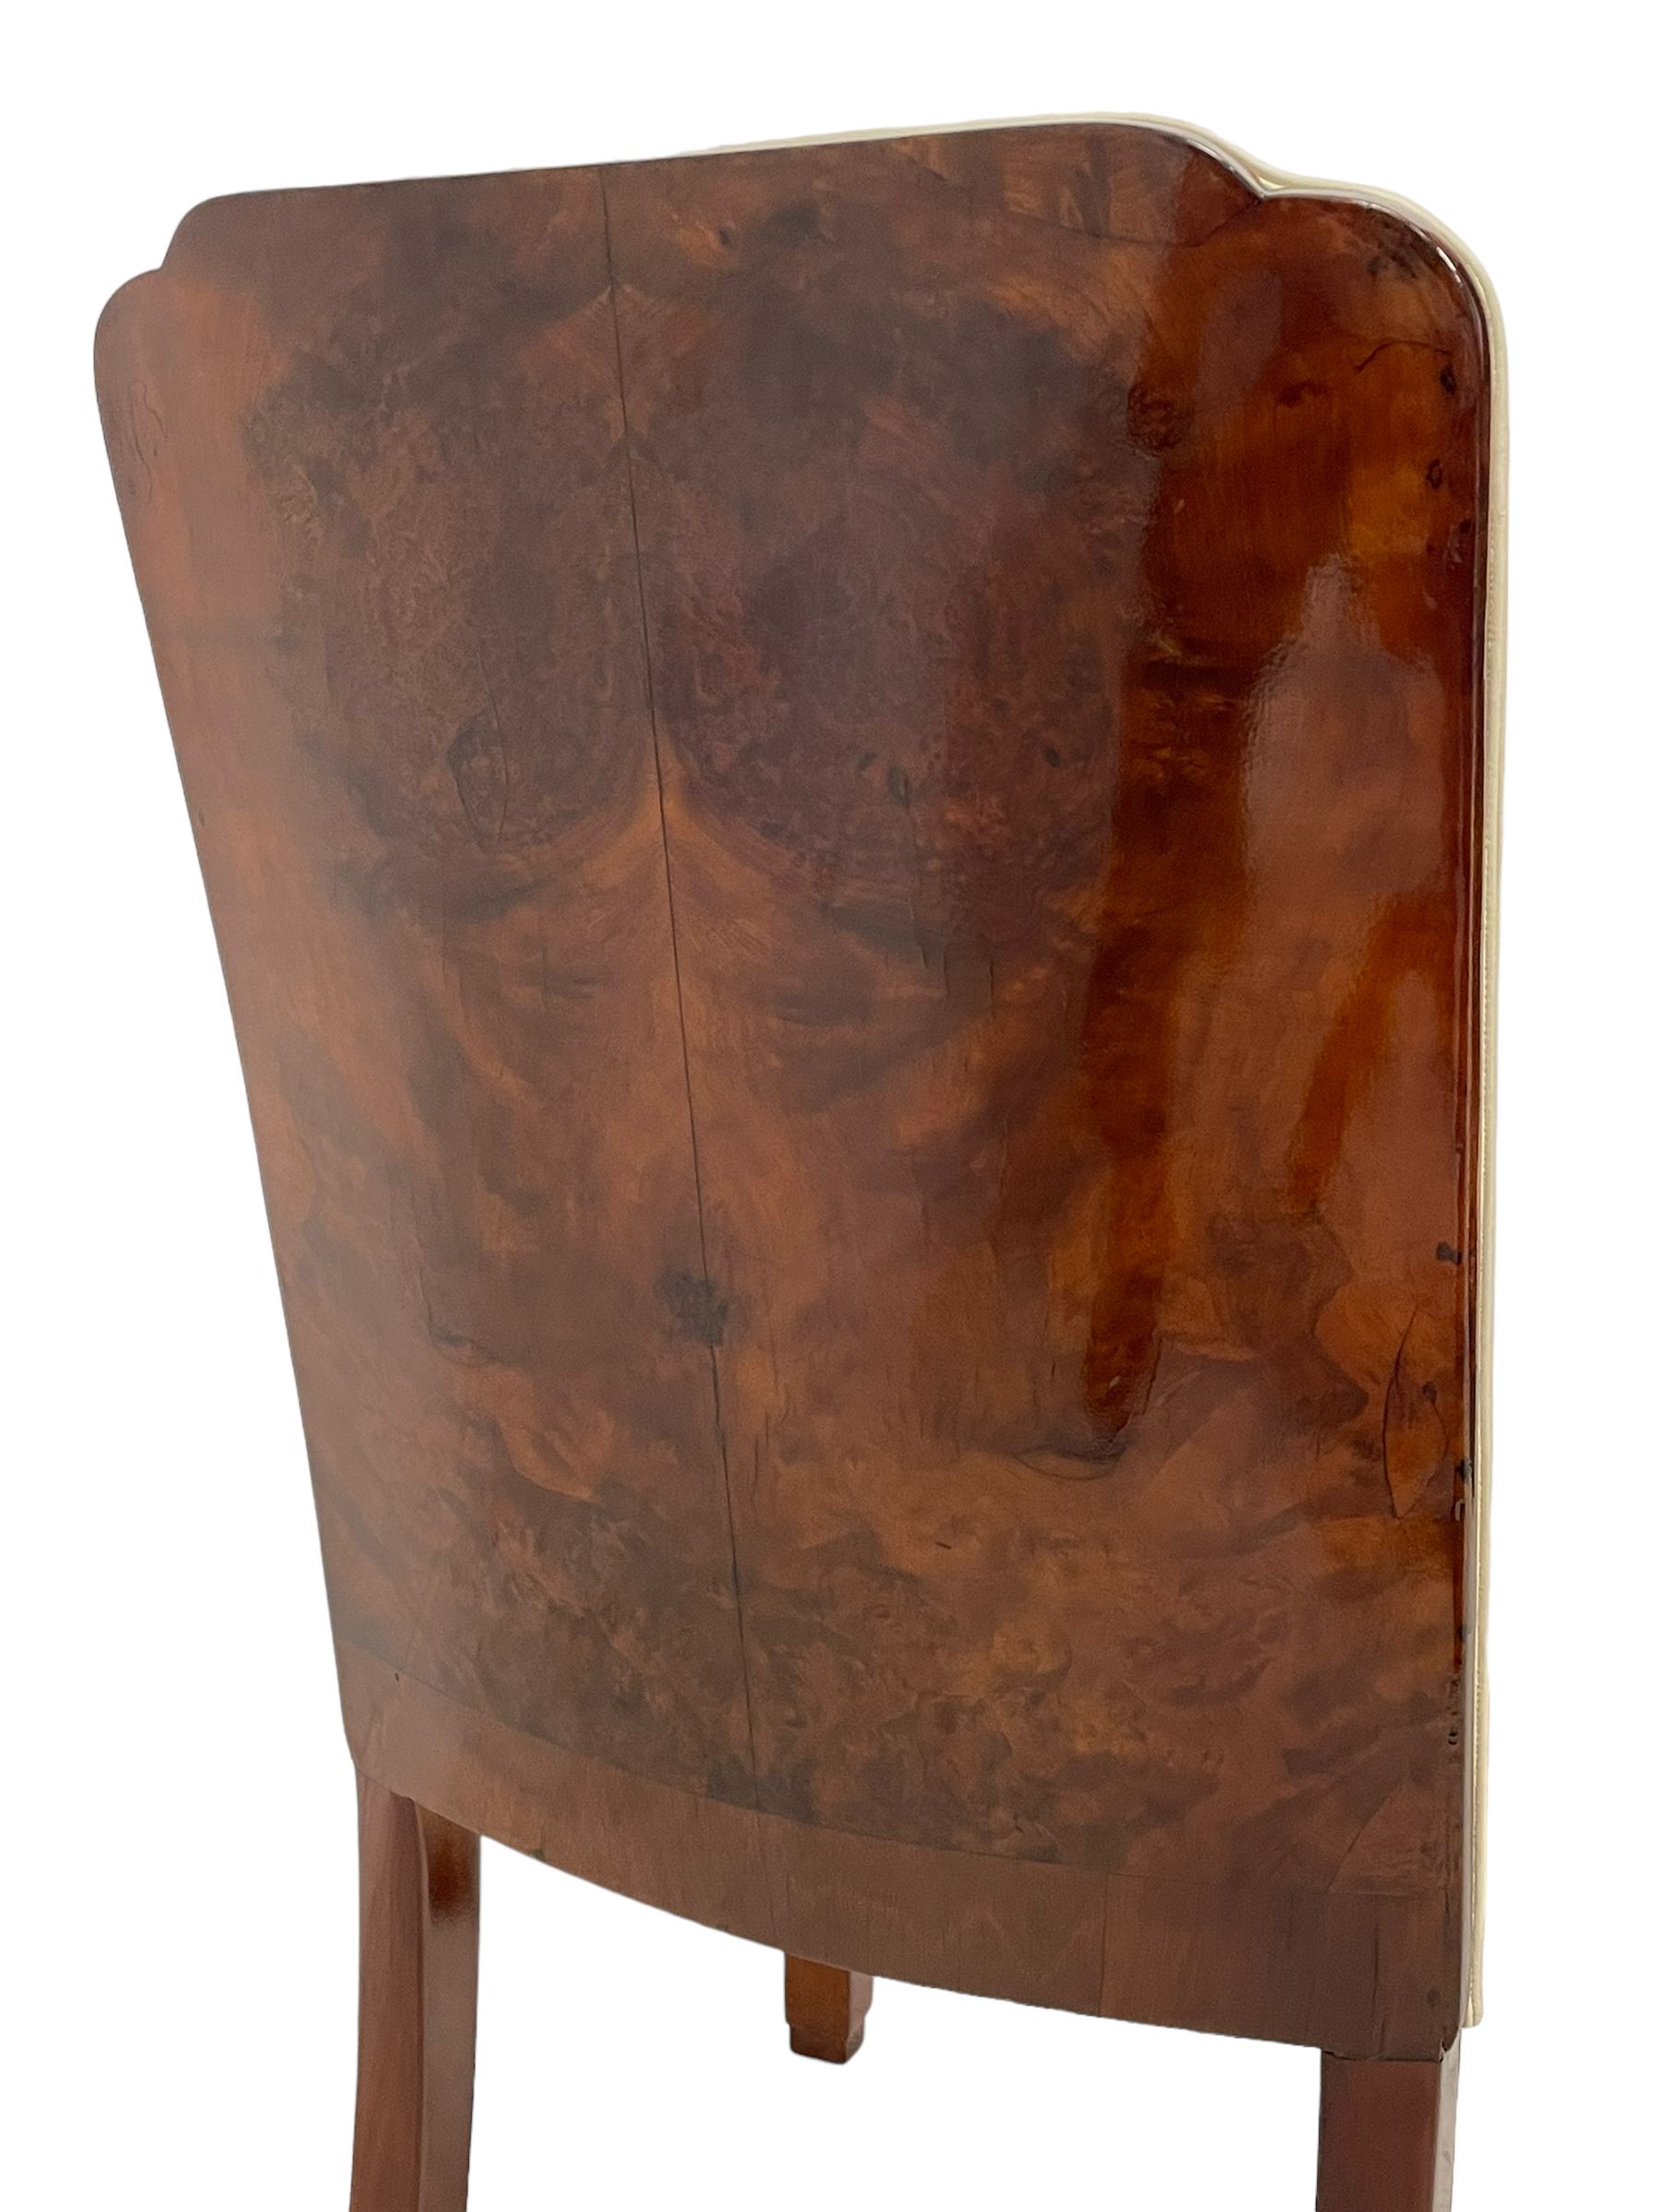 Attributed to Harry & Lou Epstein - Art Deco circa. 1930s figured walnut dining table - Image 15 of 17